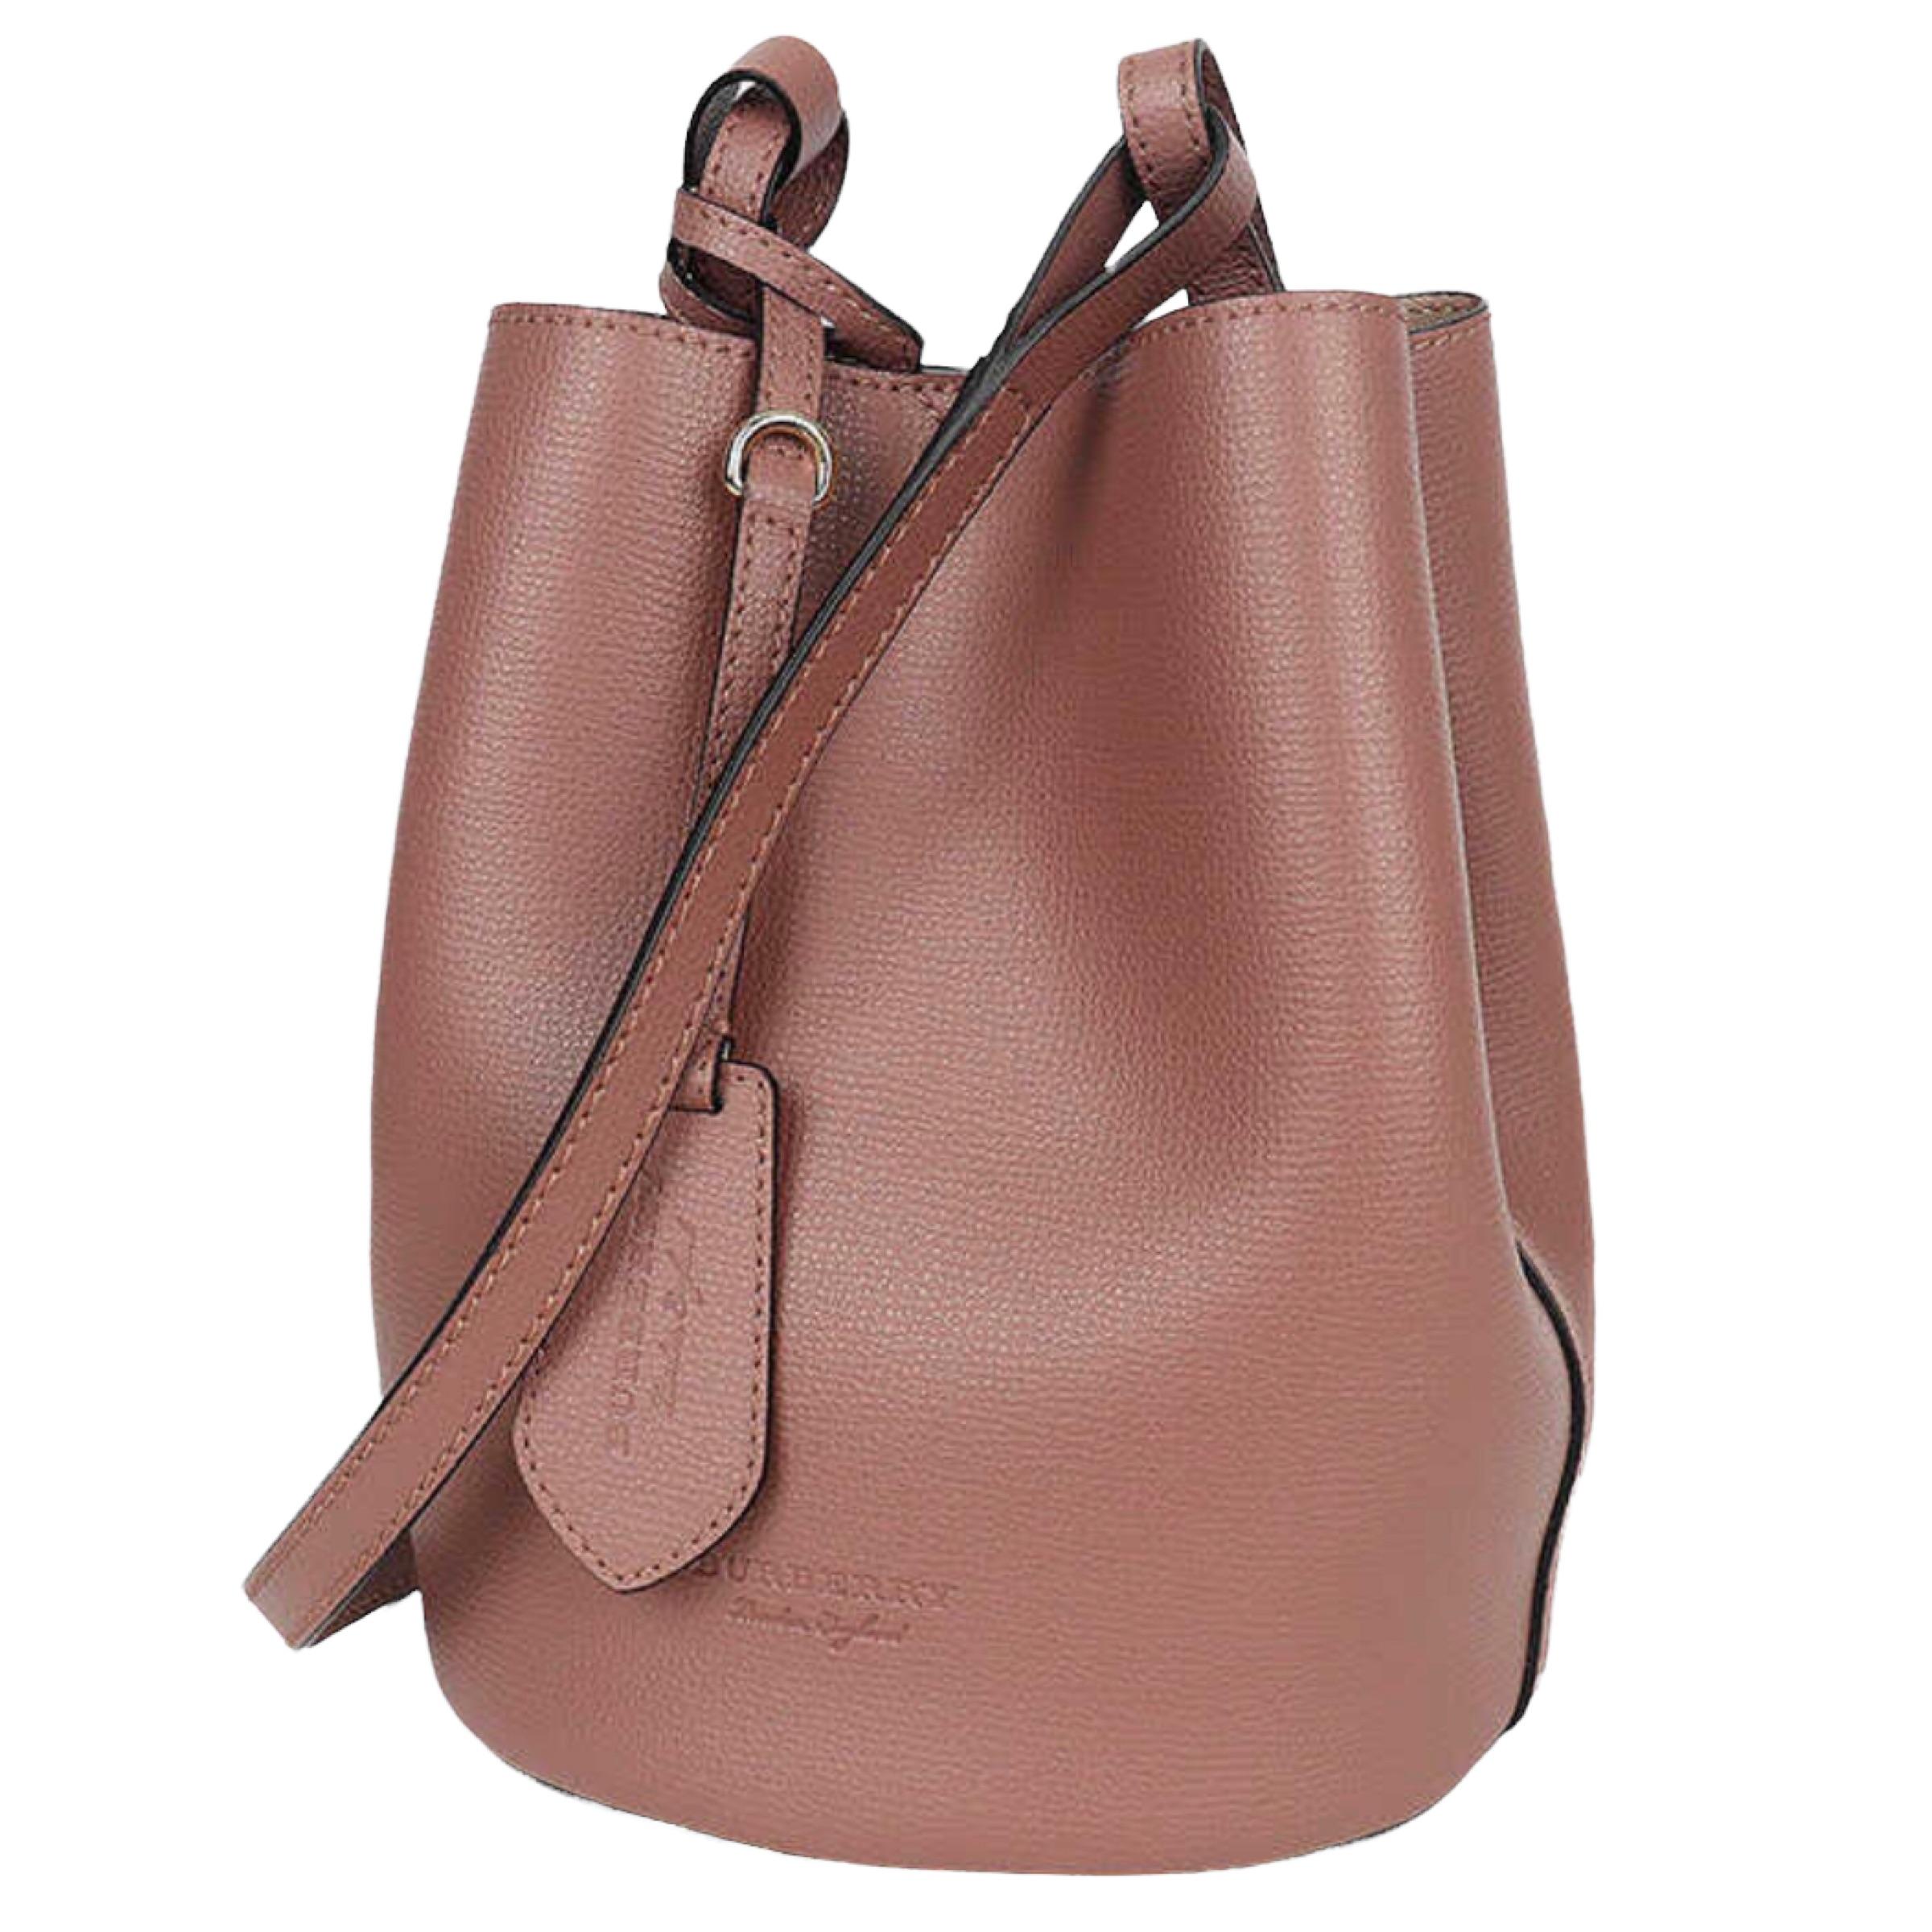 New Burberry Pink Haymarket Lone Small Leather Crossbody Bucket Bag

Authenticity Guaranteed

DETAILS
Brand: Burberry
Condition: Brand new
Gender: Women
Category: Crossbody bag
Color: Pink
Material: Leather
Gold-tone hardware
Adjustable shoulder